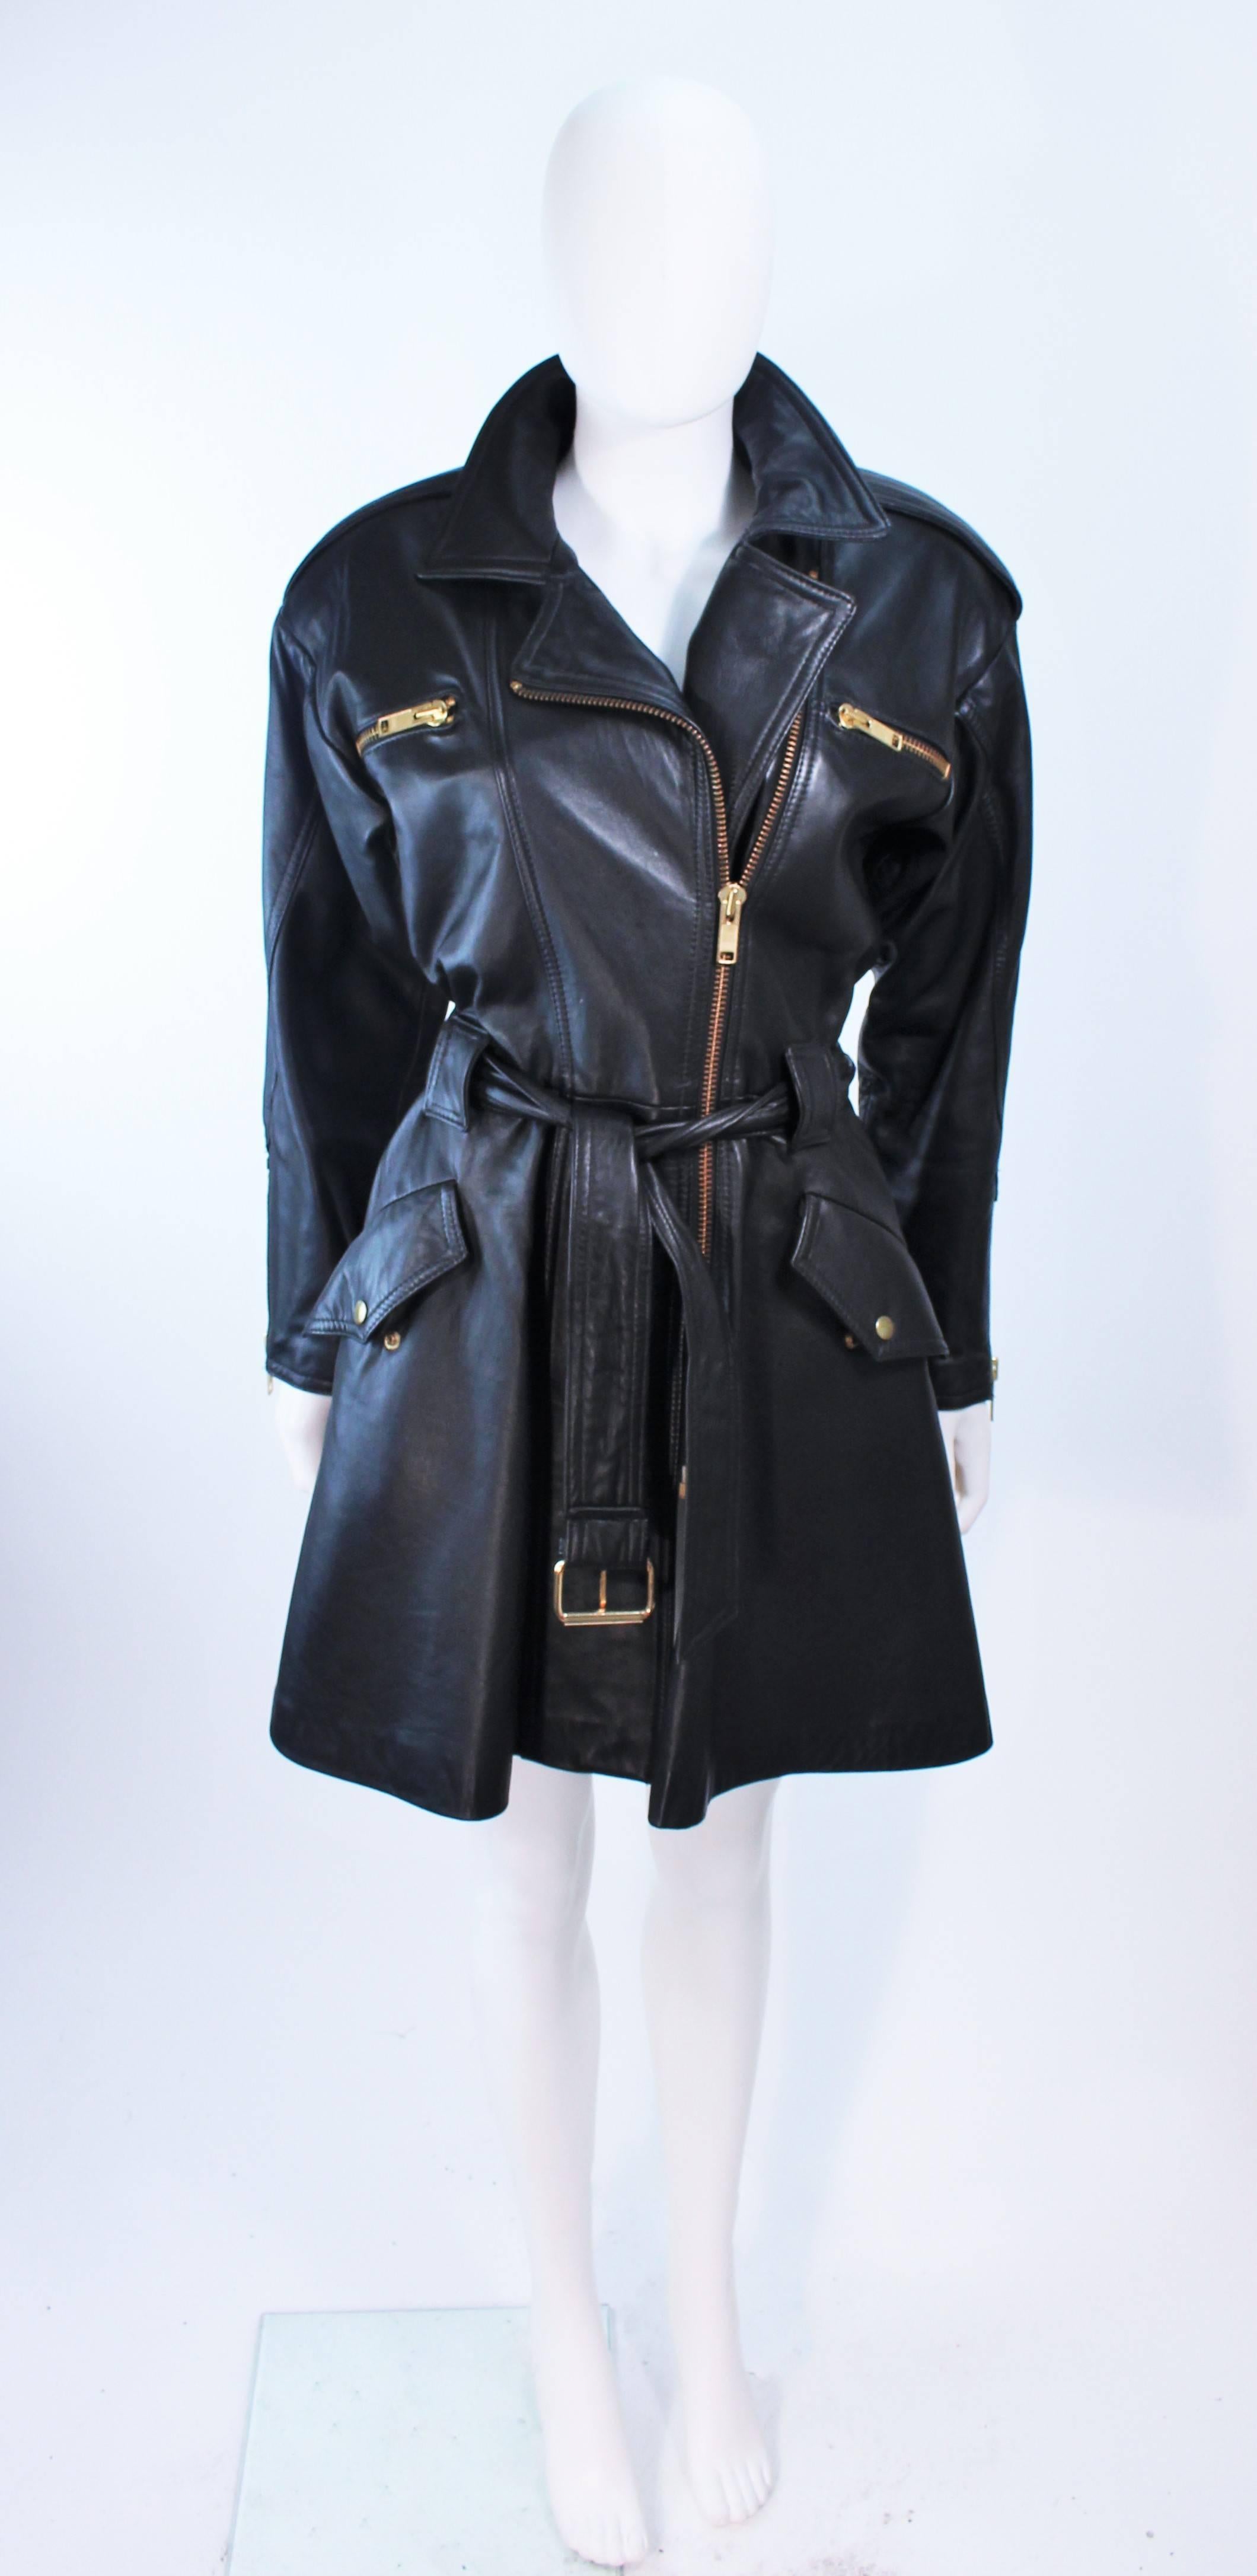 This Margret Godfrey coat is composed of black leather with gold hue metal hardware. Features a dress style design with larger padded shoulders. In excellent vintage condition.

**Please cross-reference measurements for personal accuracy. Size in